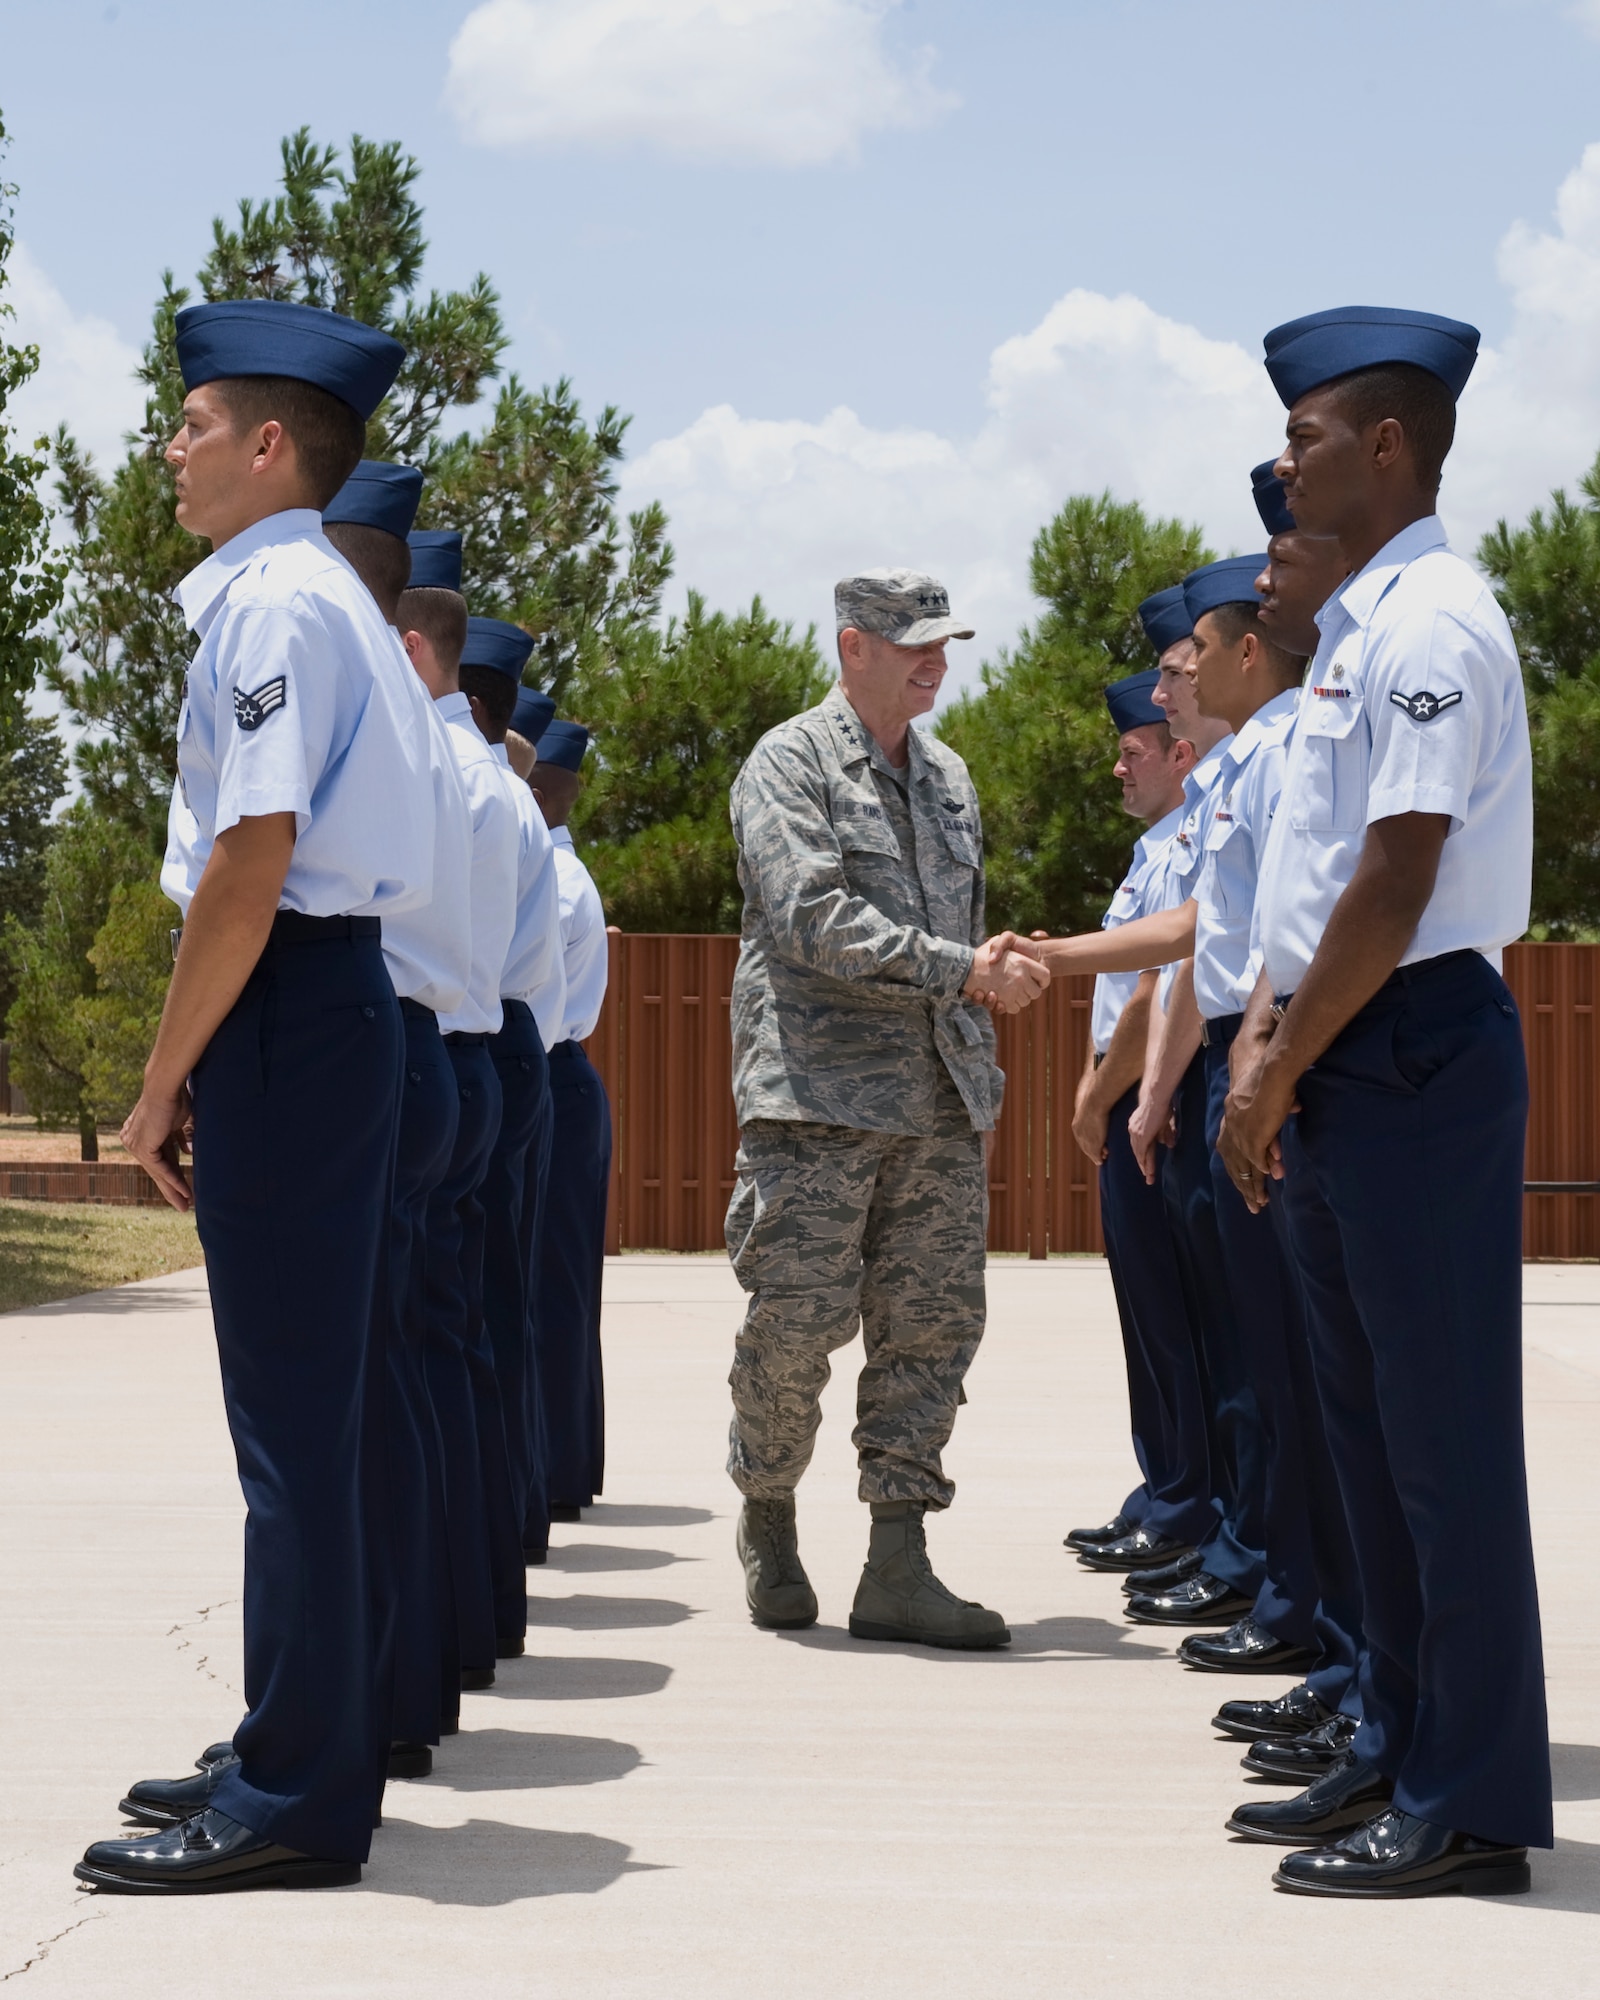 U.S. Air Force Lt. Gen. Robin Rand, 12th Air Force commander, visits with Dyess Honor Guard Airmen July 2, 2012, at Dyess Air Force Base, Texas. During his visit, Rand expressed his gratitude to all Dyess Airmen and their families for their outstanding support of global missions and operations. (U.S. Air Force photo by Staff Sgt. Richard P. Ebensberger/ Released)